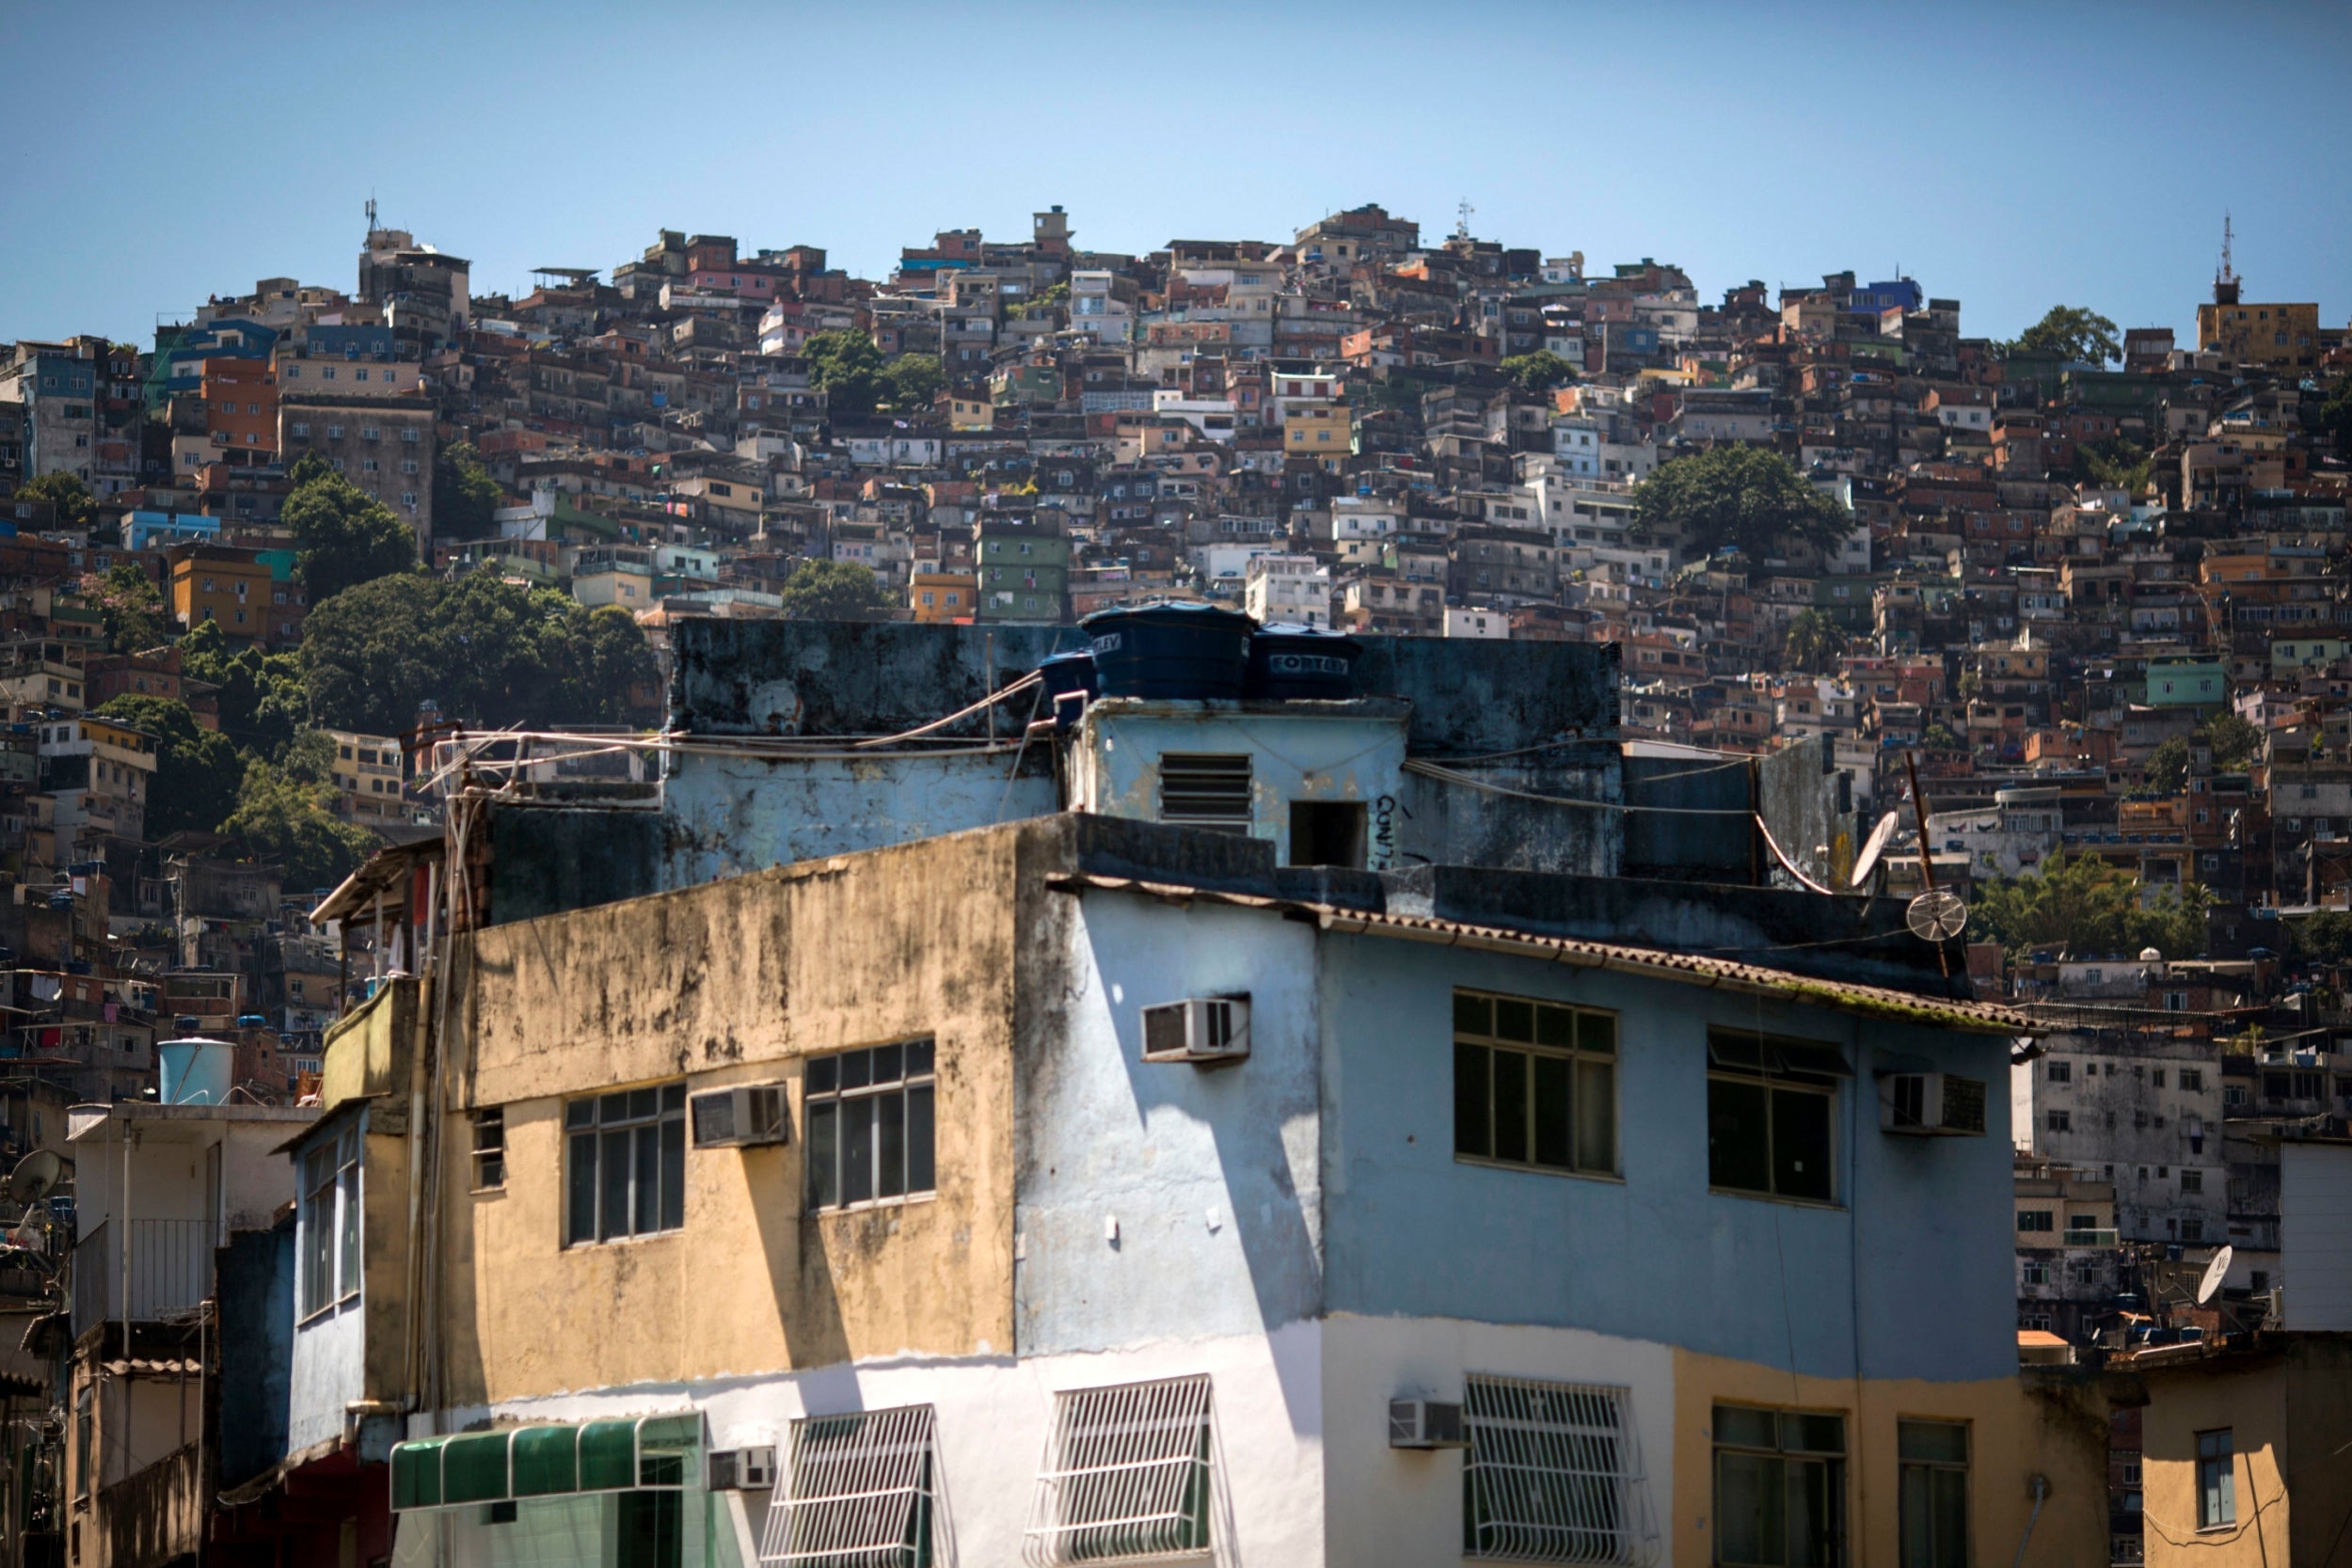 The Rocinha favela which has experienced high levels of violence (AFP/Getty)